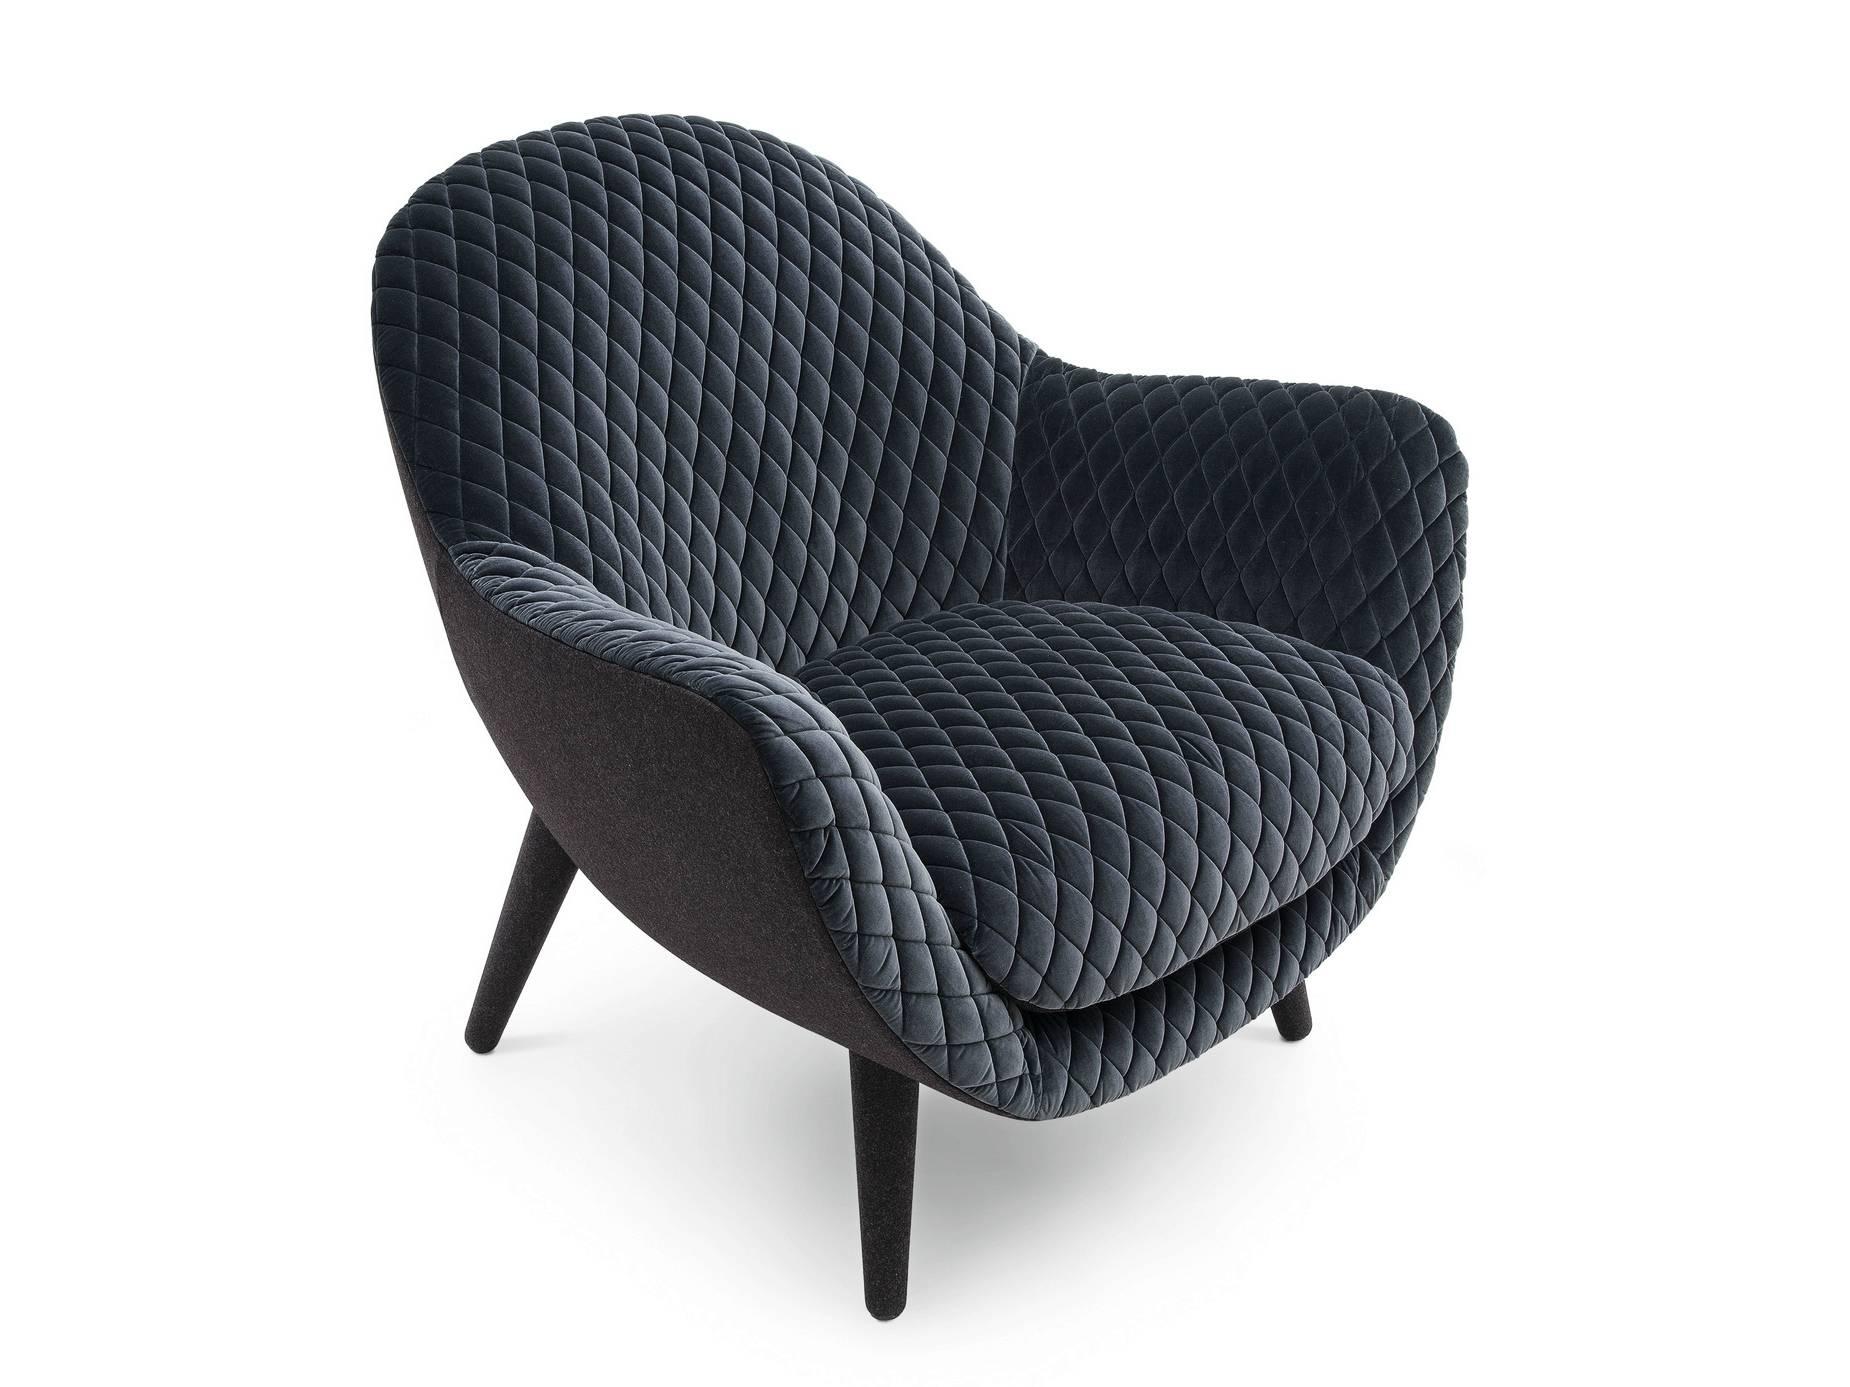 A continuous body, an enveloping seat and an image strongly characterized by a matelassè finishing: Mad Queen plays on exclusive artisan details to add to the collection that began with Mad Chair in 2013. A low armchair with soft, continuous lines